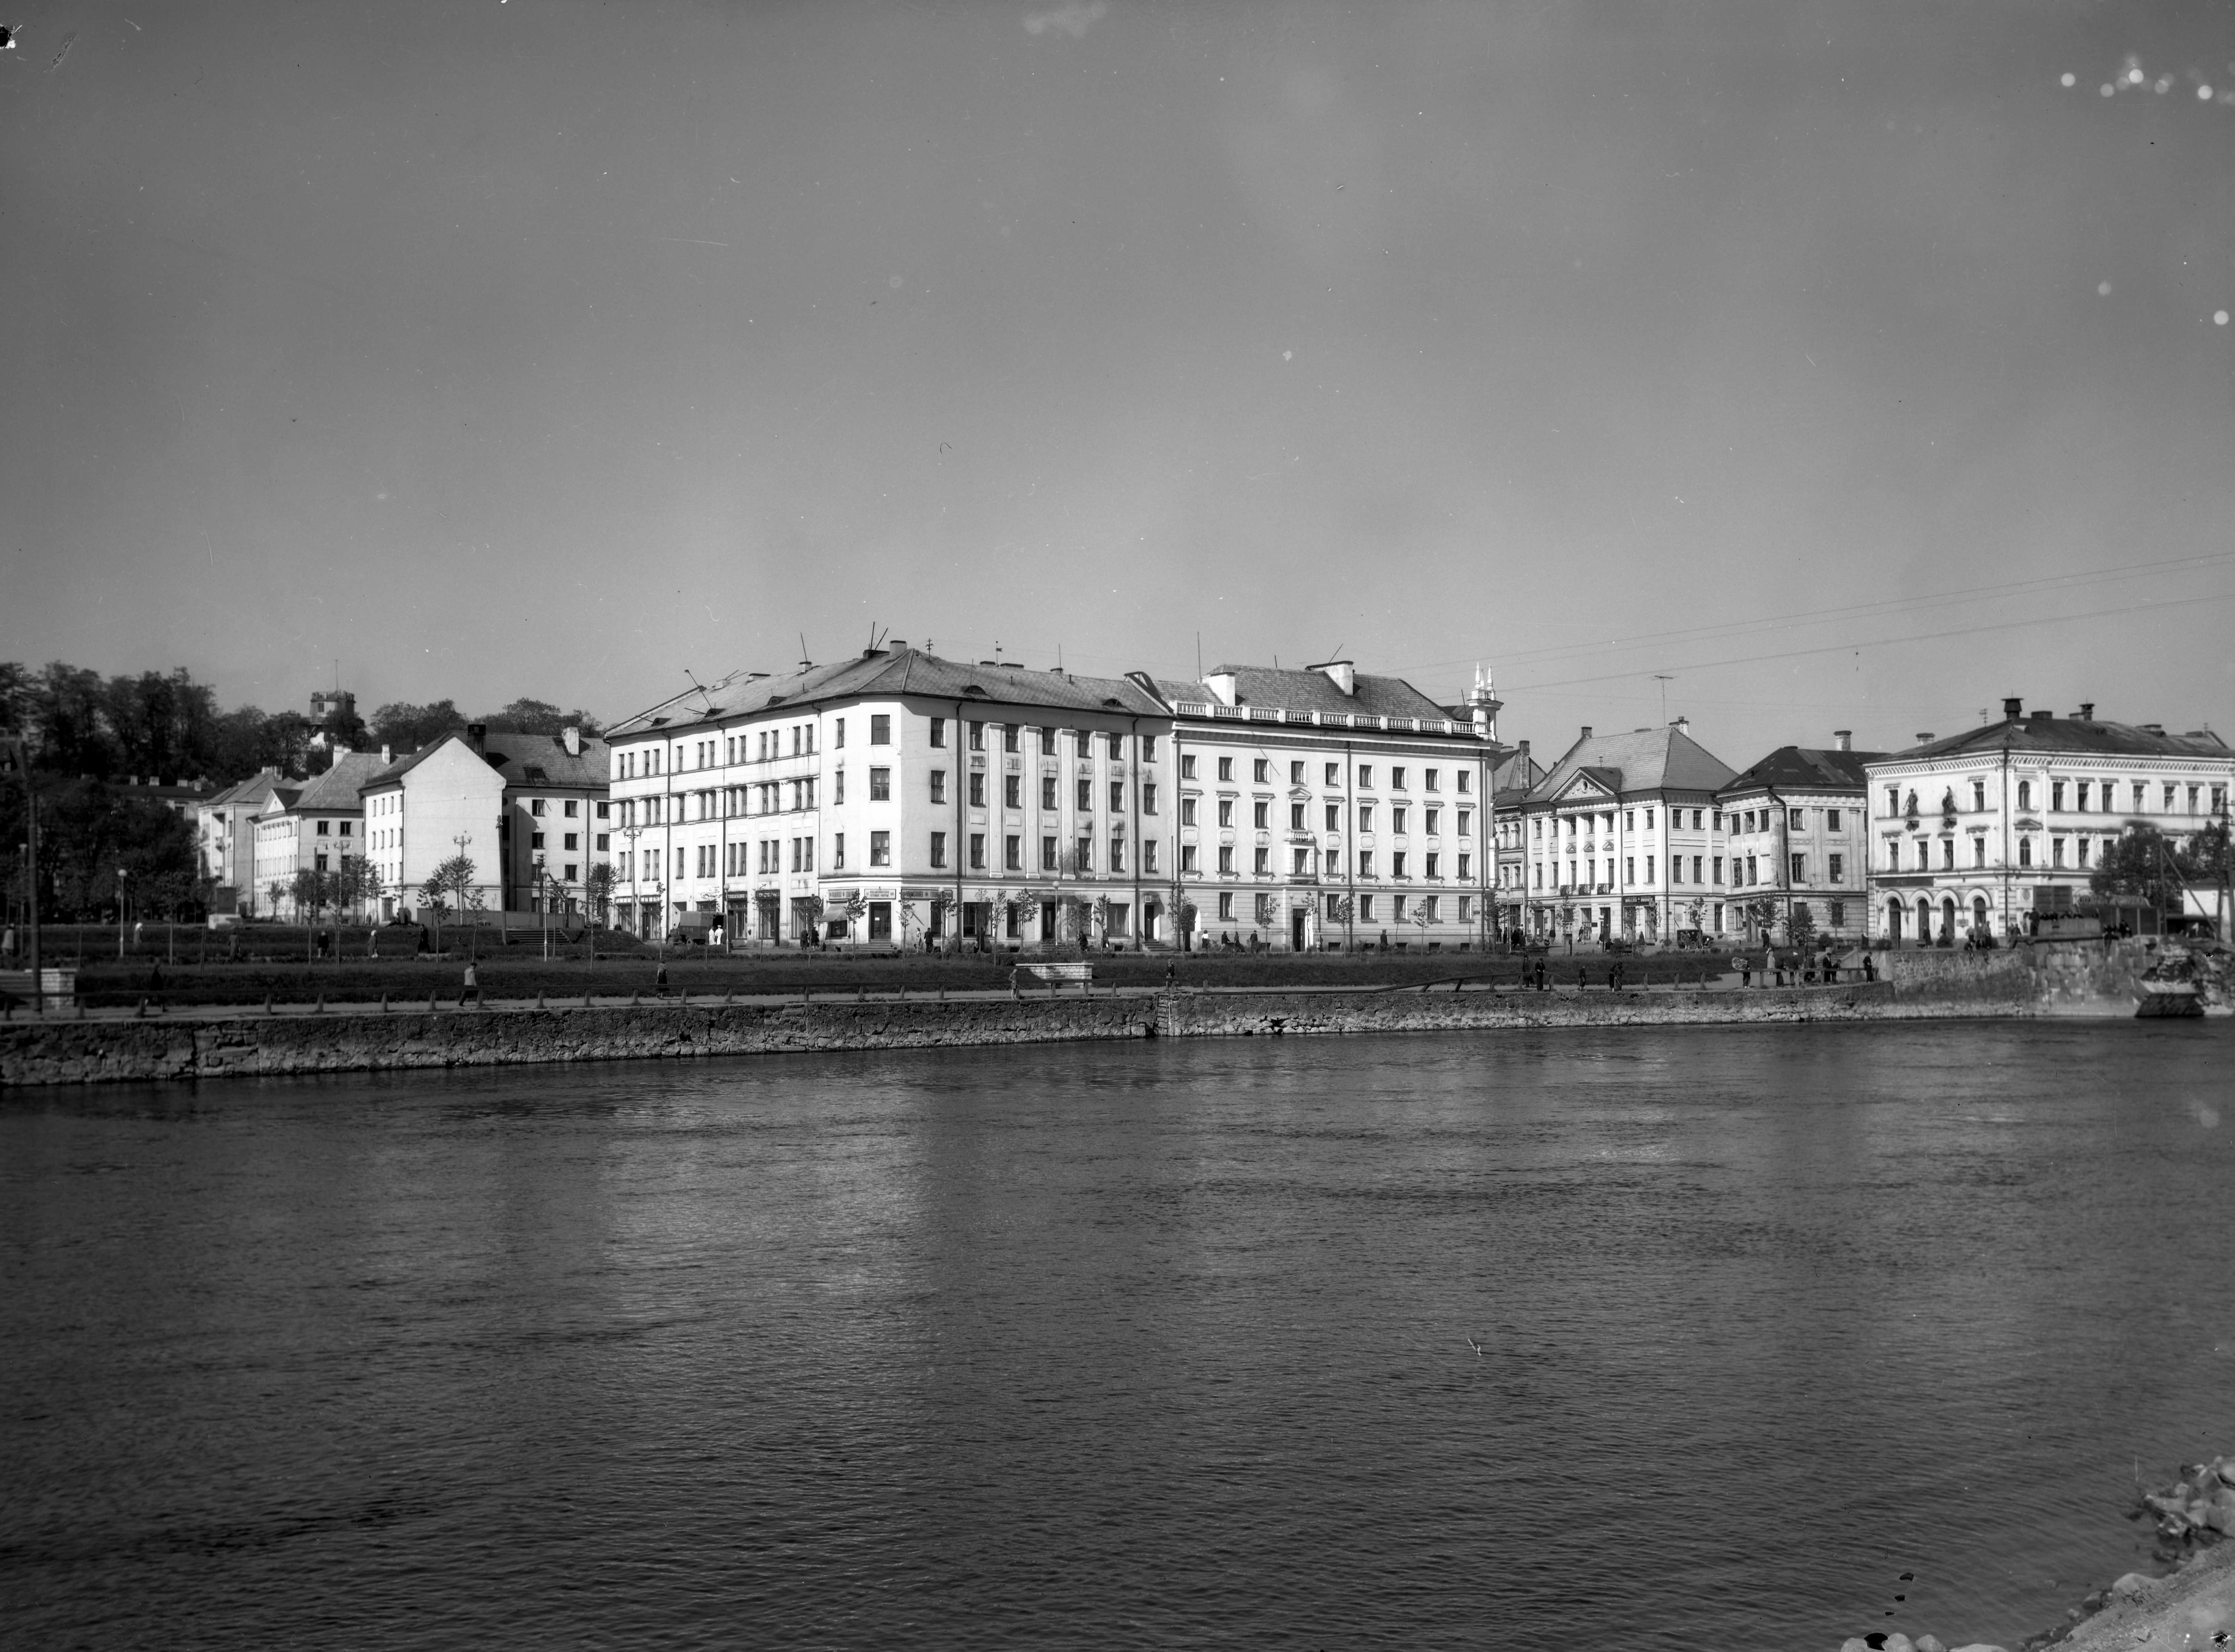 View of the buildings located at the corner of Vabaduse pst and Poe Street and at the beginning of Raekoja square in the direction of Emajõe W